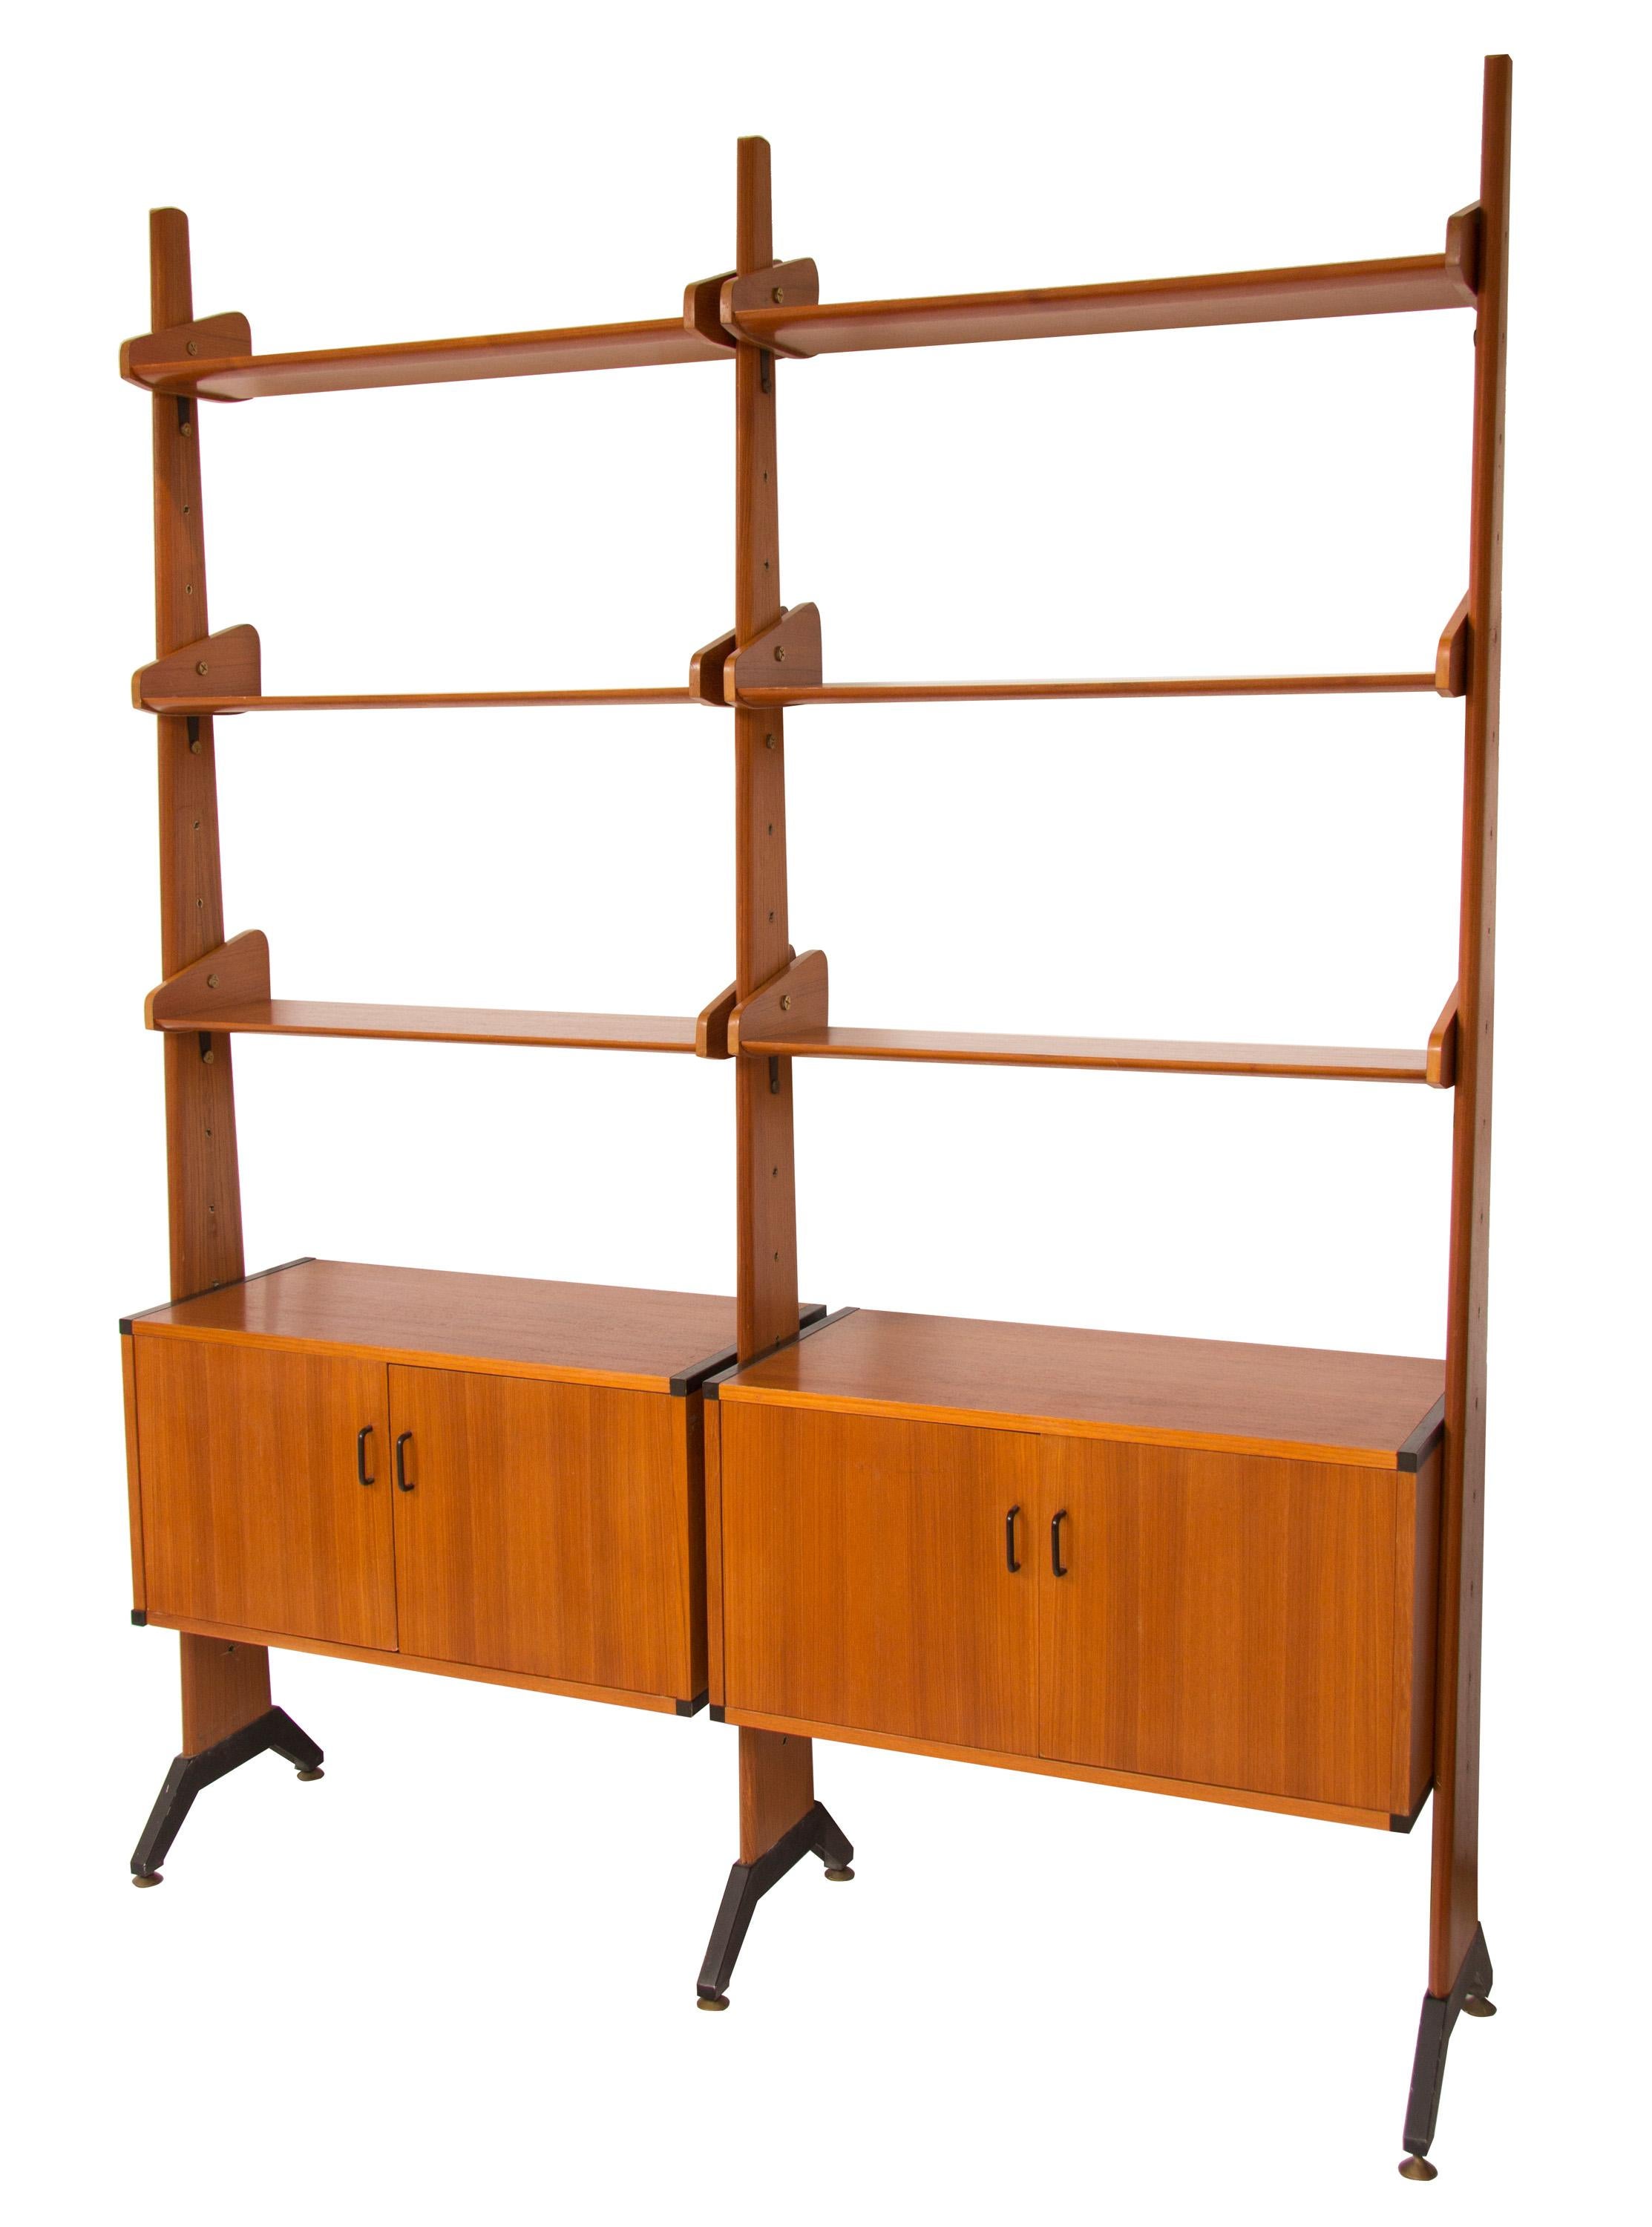 1960s Italian free-standing teak wall unit produced by AV Arredamenti Contemporanei. The Teak veneered adjustable shelves are fixed with feature black supports and brass bolts which hold the shelves horizontal and secure. The wall unit sits on a